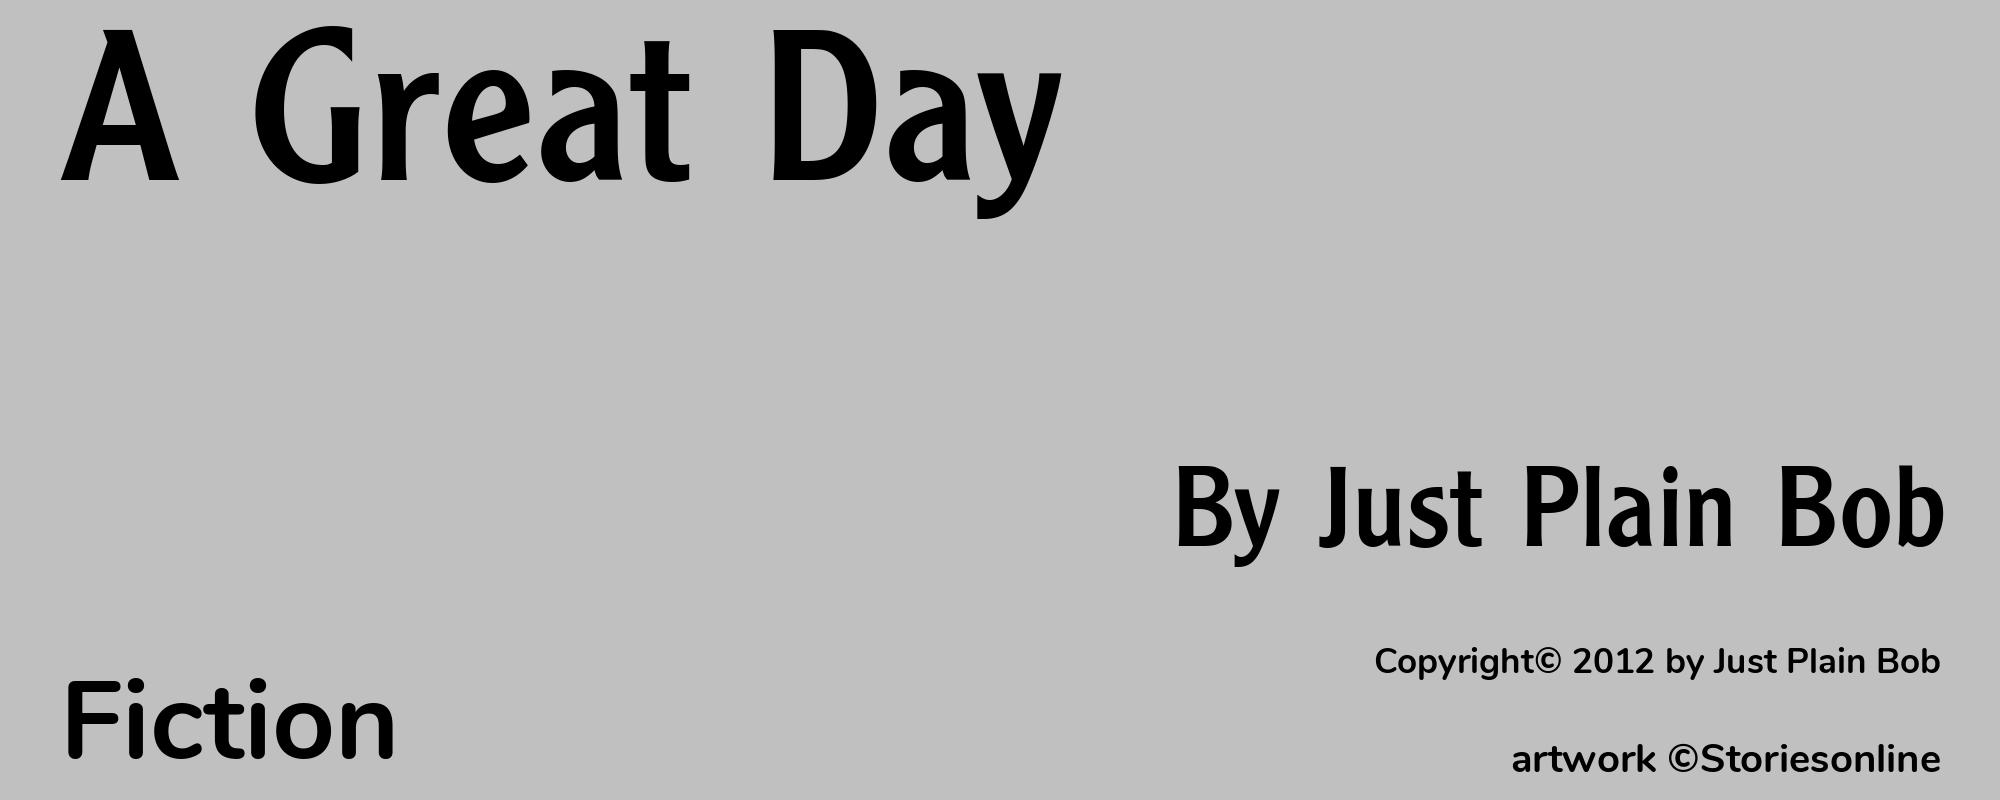 A Great Day - Cover